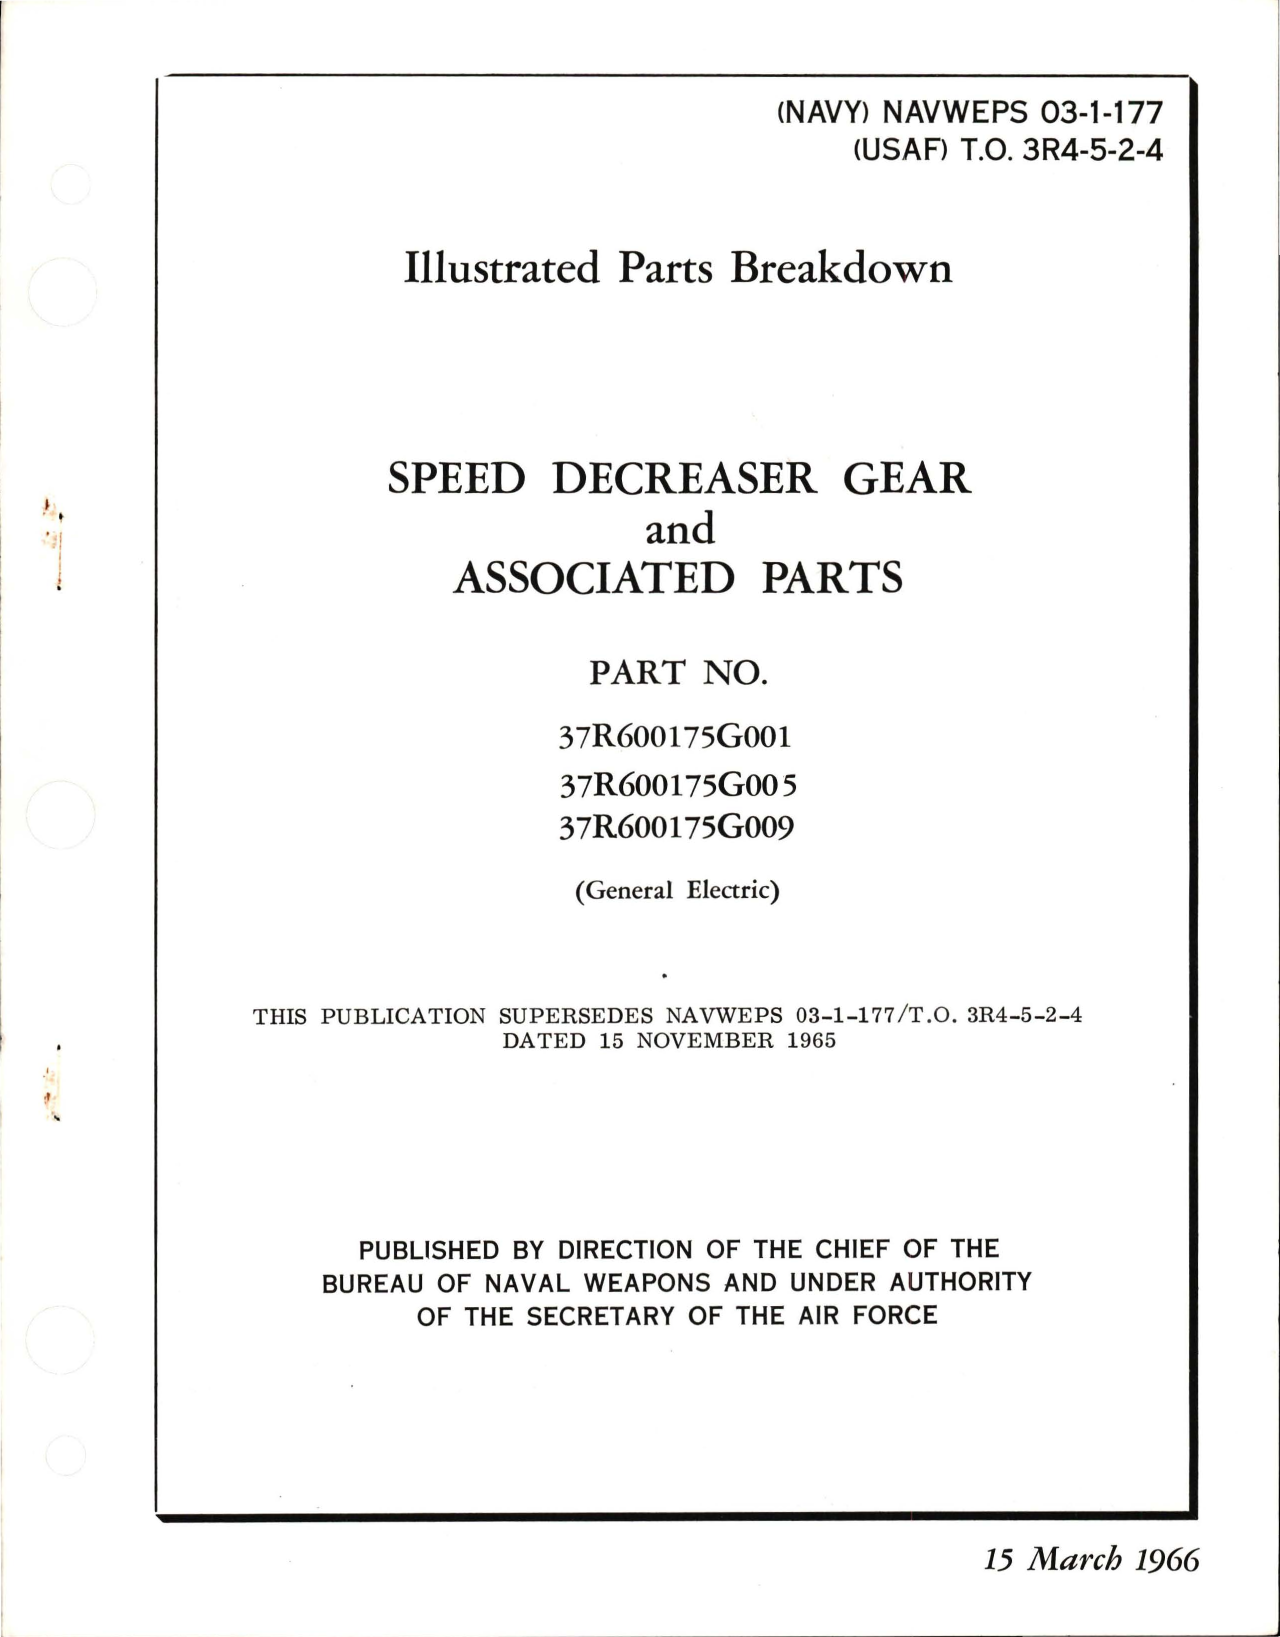 Sample page 1 from AirCorps Library document: Illustrated Parts Breakdown for Speed Decreaser Gear and Associated Parts - Parts 37R600175G001, 37R600175G005, and 37R600175G009 